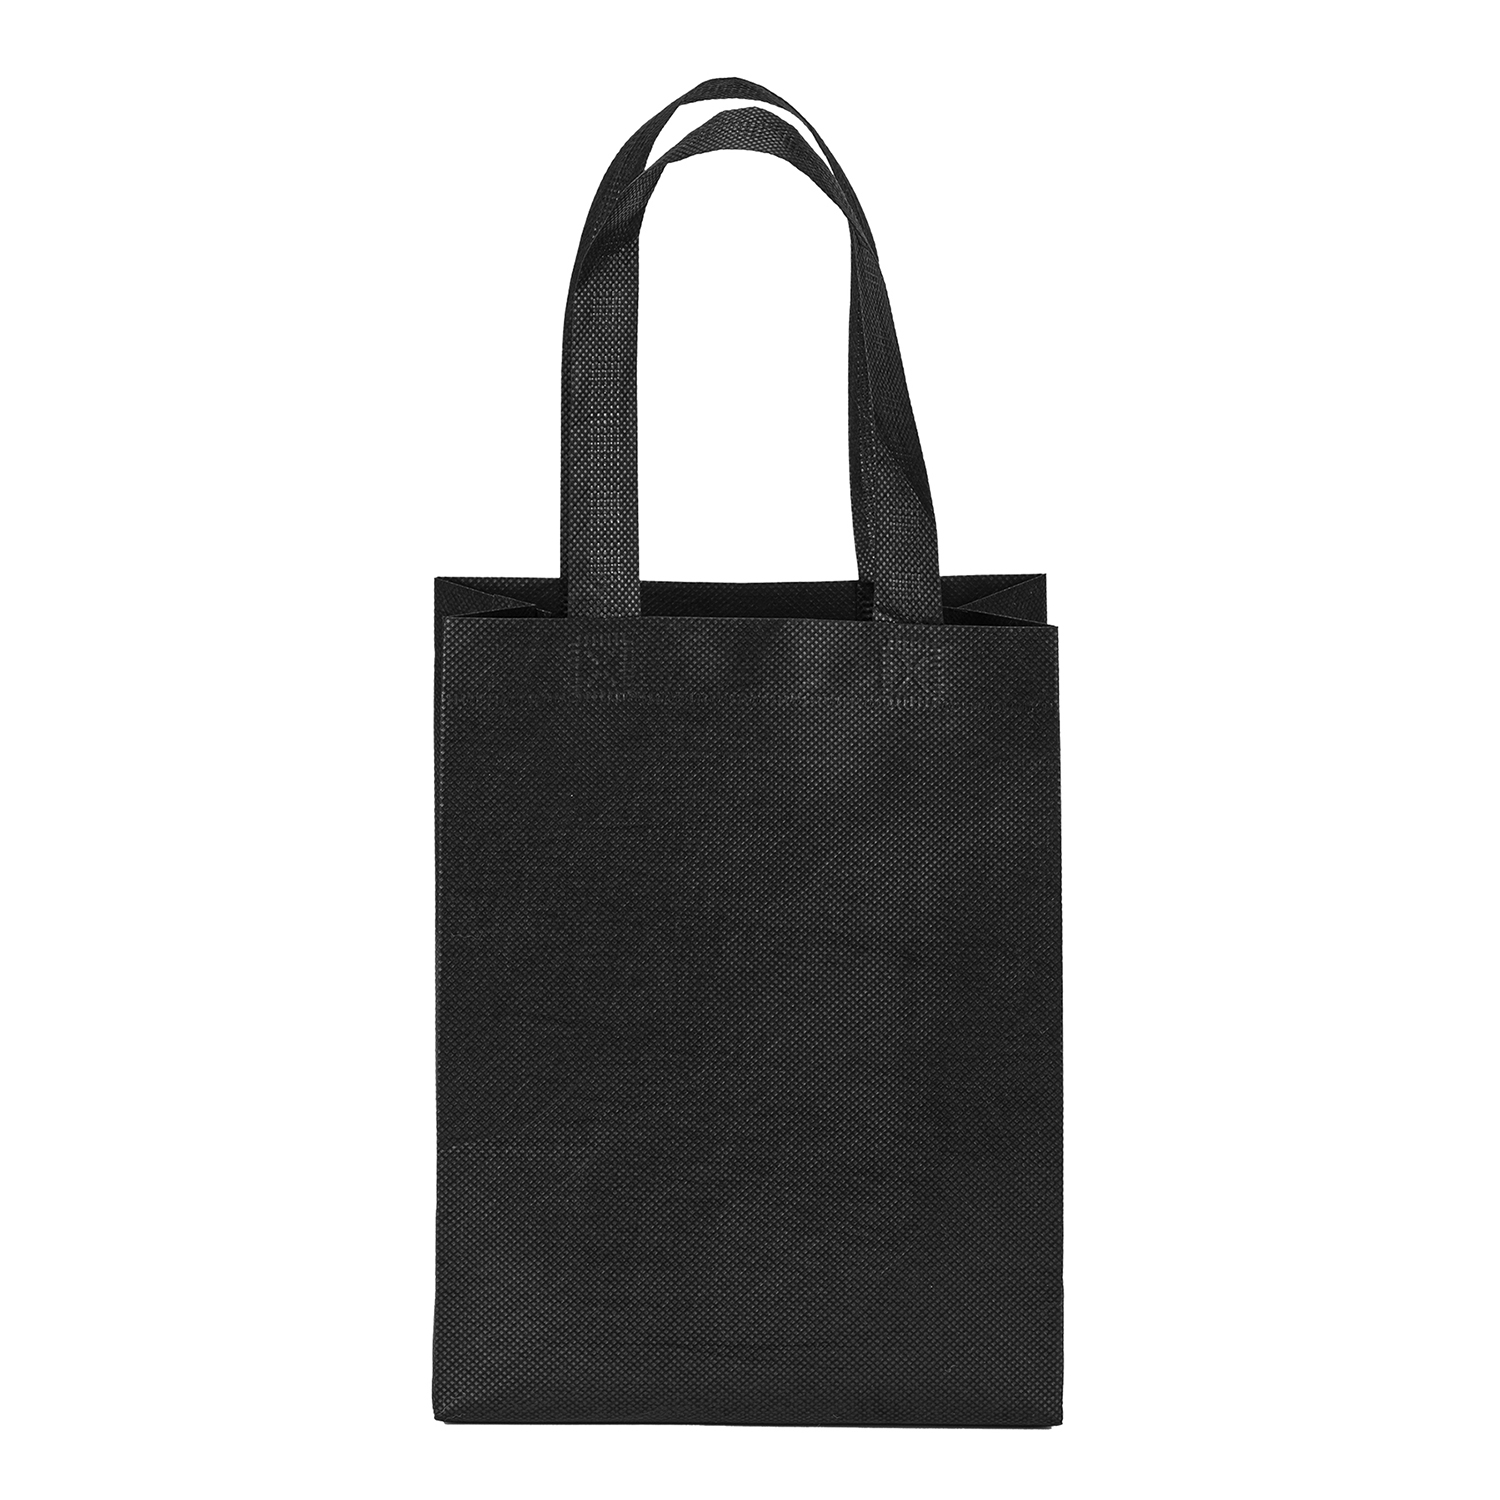 Bag Makers 40LA810 - Custom Printed Eco-Friendly Promotional Non-Woven Grocery Tote Bag